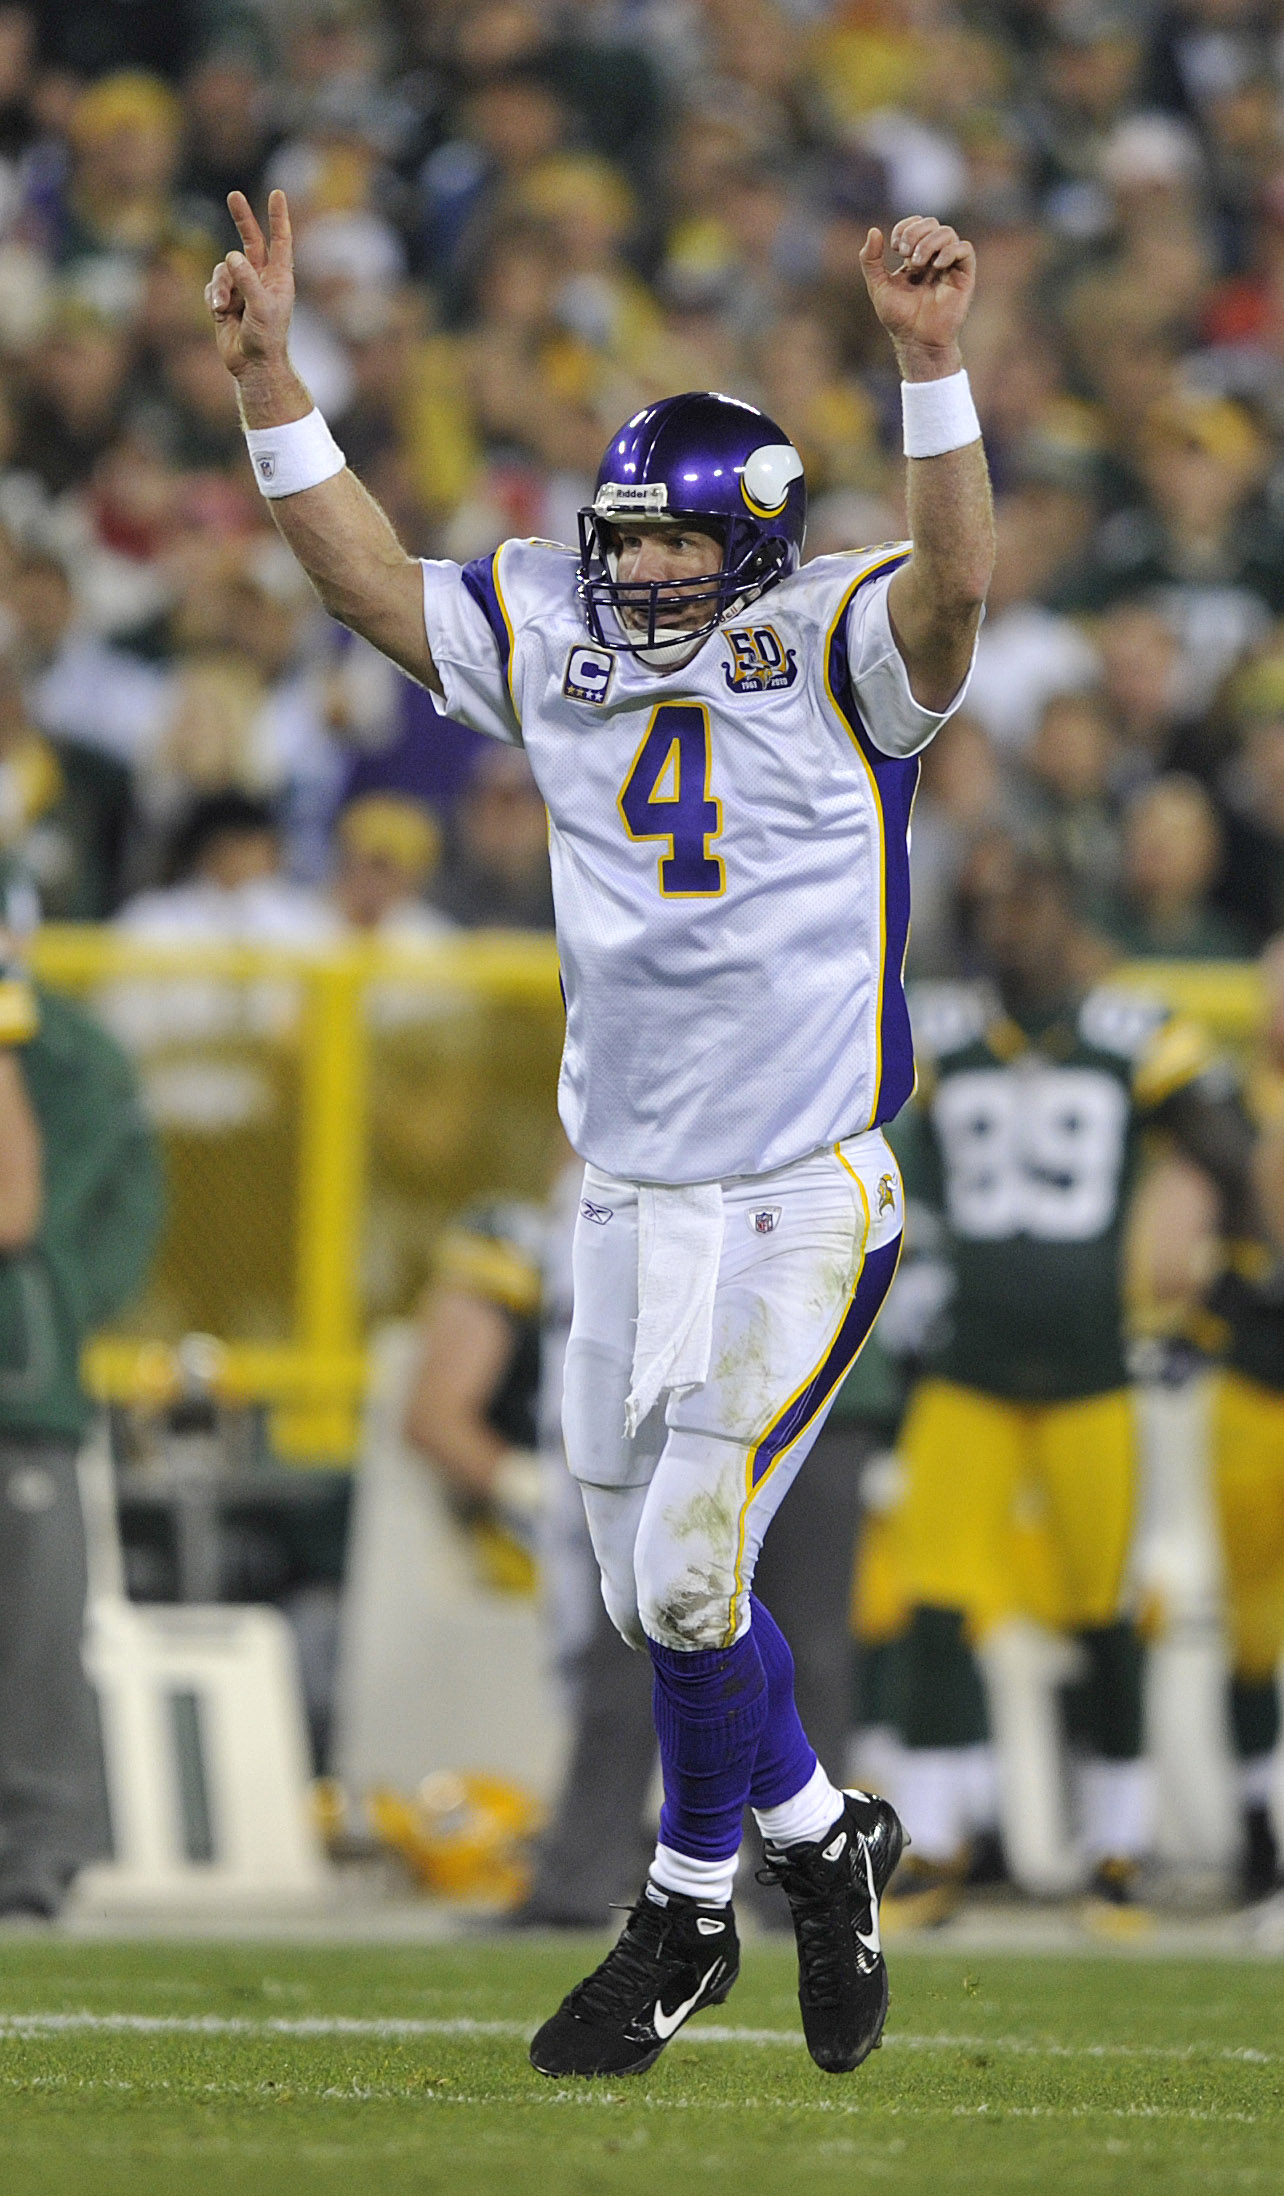 GREEN BAY, WI - OCTOBER 24:   Brett Favre #4 of the Minnesota Vikings celebrates a touchdown against the Green Bay Packers at Lambeau Field on October 24, 2010 in Green Bay, Wisconsin. (Photo by Jim Prisching/Getty Images)